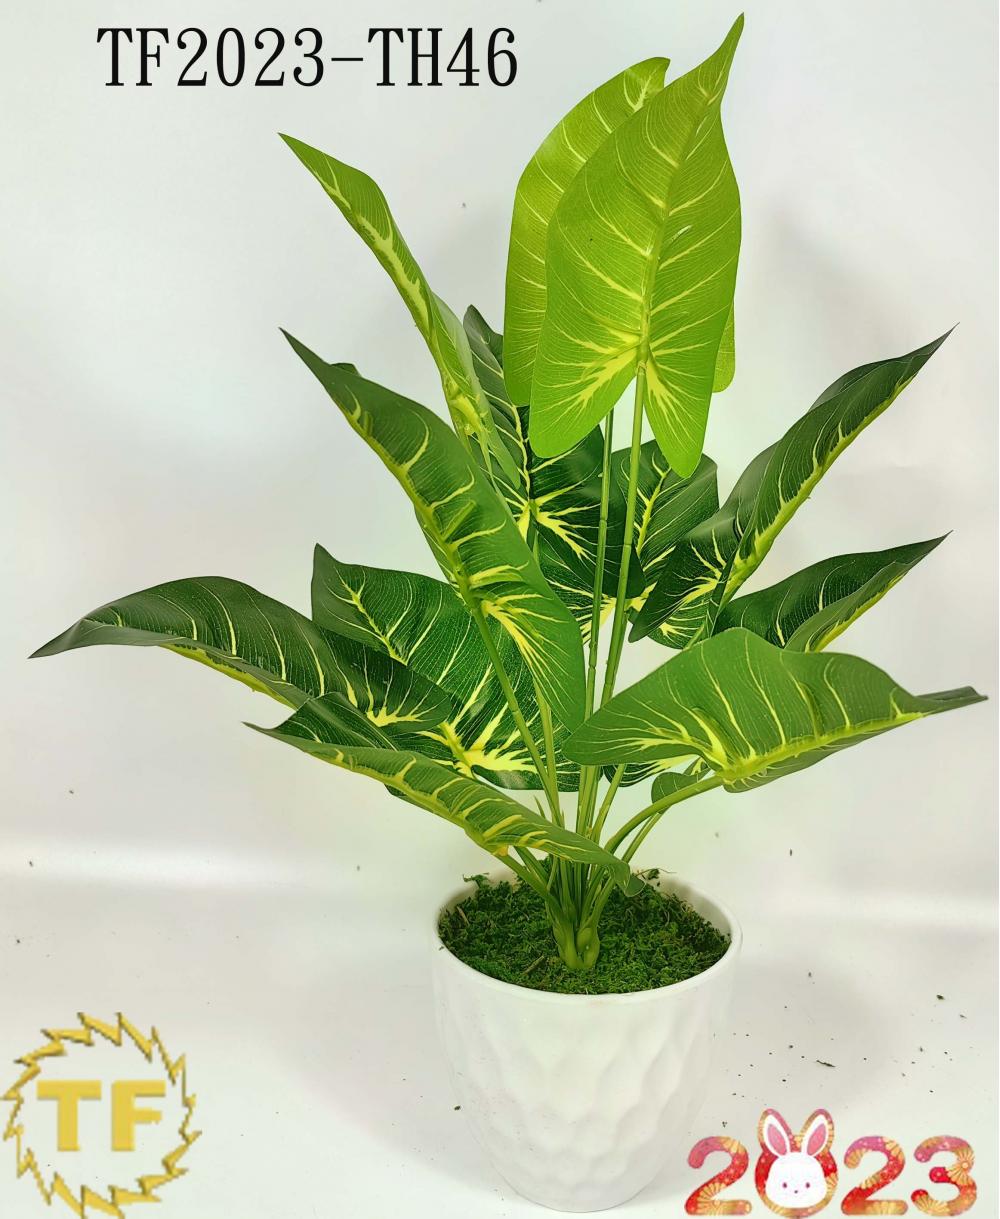 46cm philodendron leaf x 12 with plastic Pot